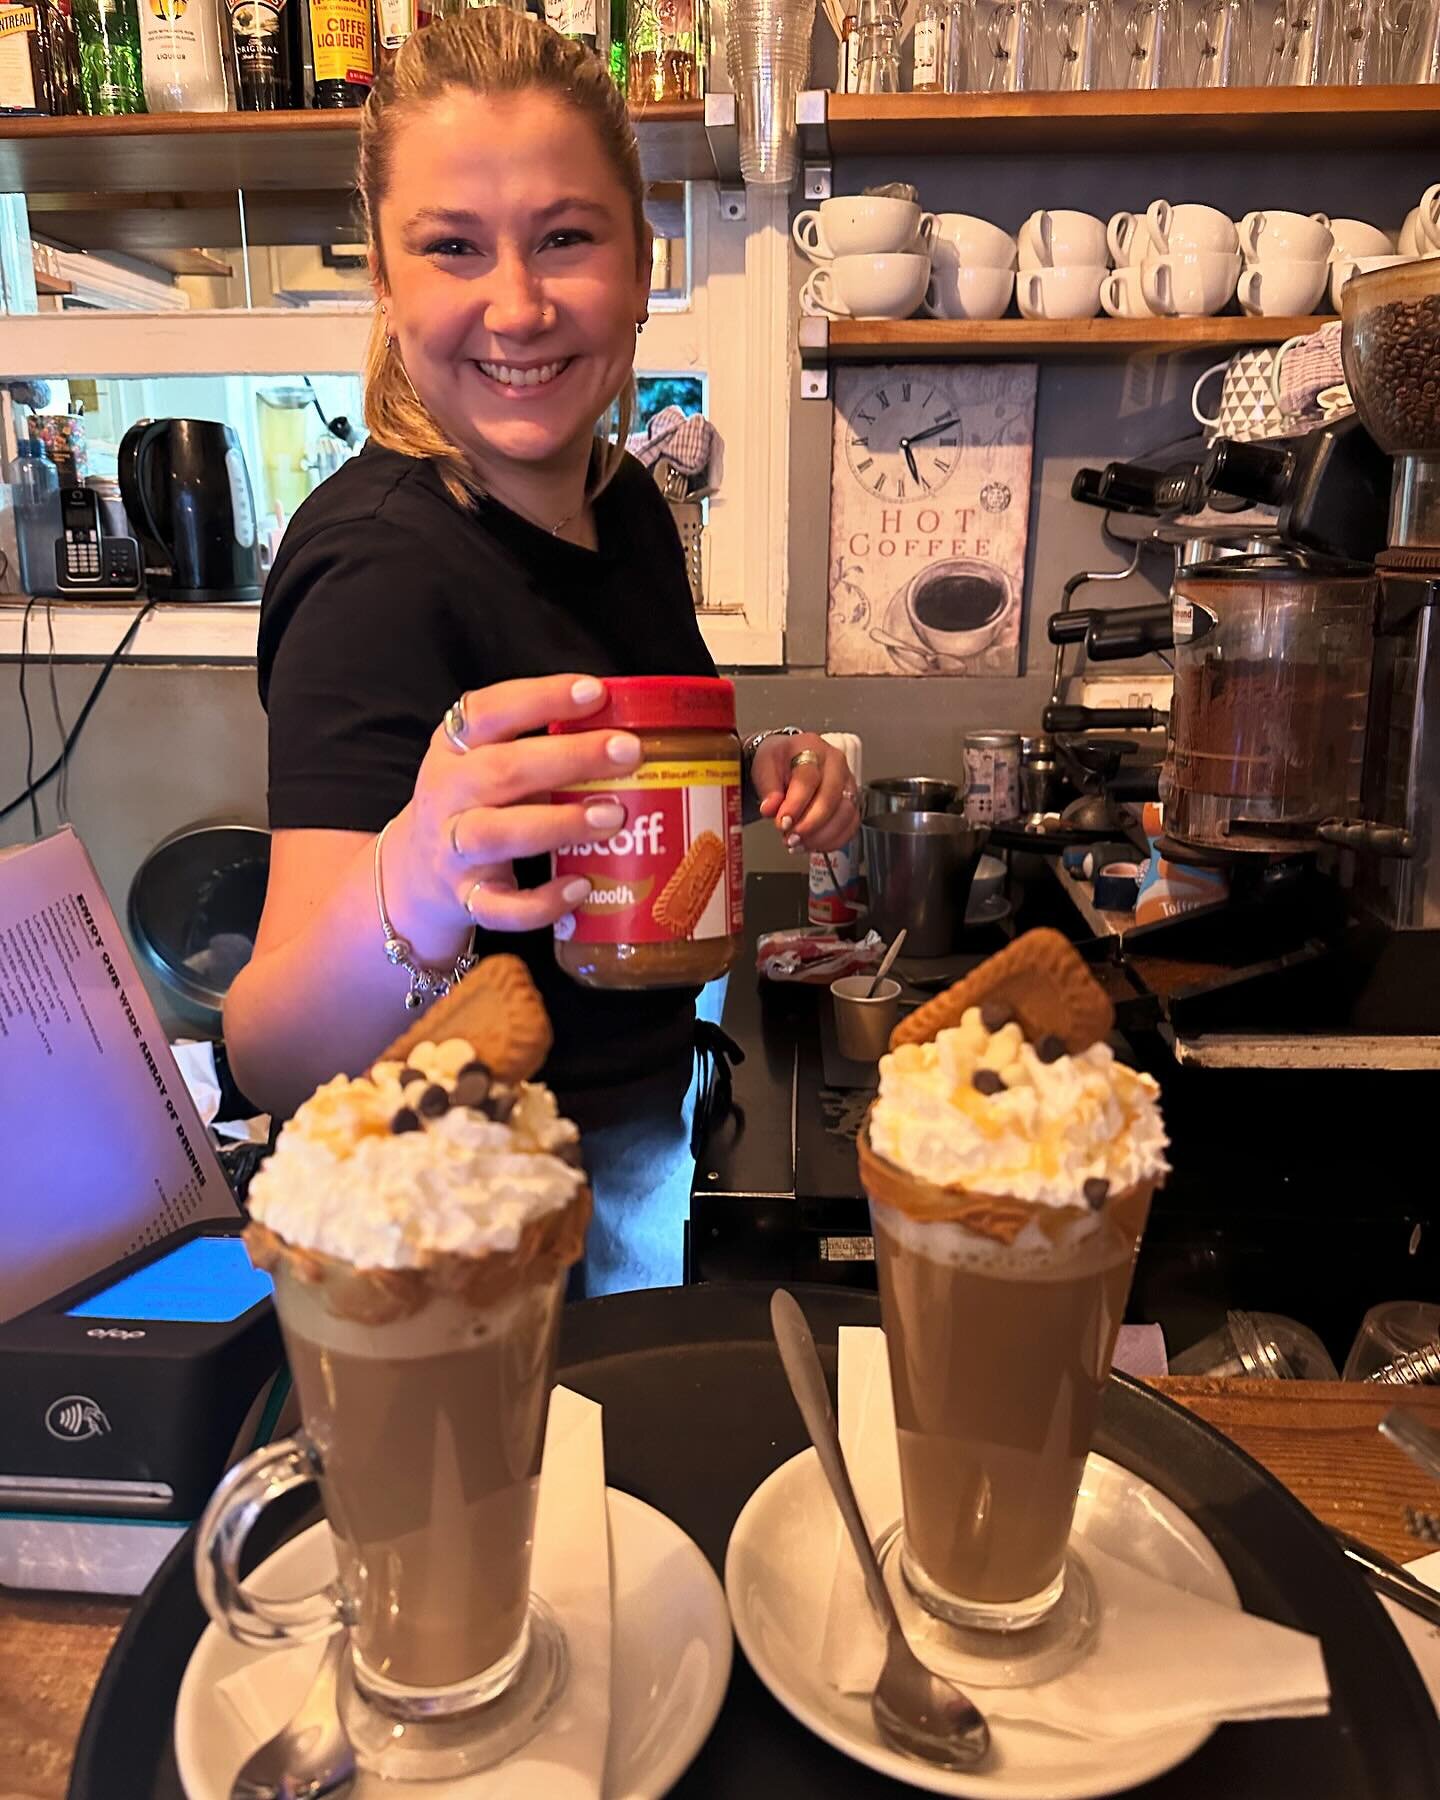 Come in while the sun is out and indulge yourself in the best flavour of our Biscoff latte. Taste buds, prepare to be amazed 🔝🙌🏻☕️💯😋

#restaurant #cafe #brighton #brightonrestaurant #northlainesbrighton #brightoncafe #brightonandhove #brightonfo